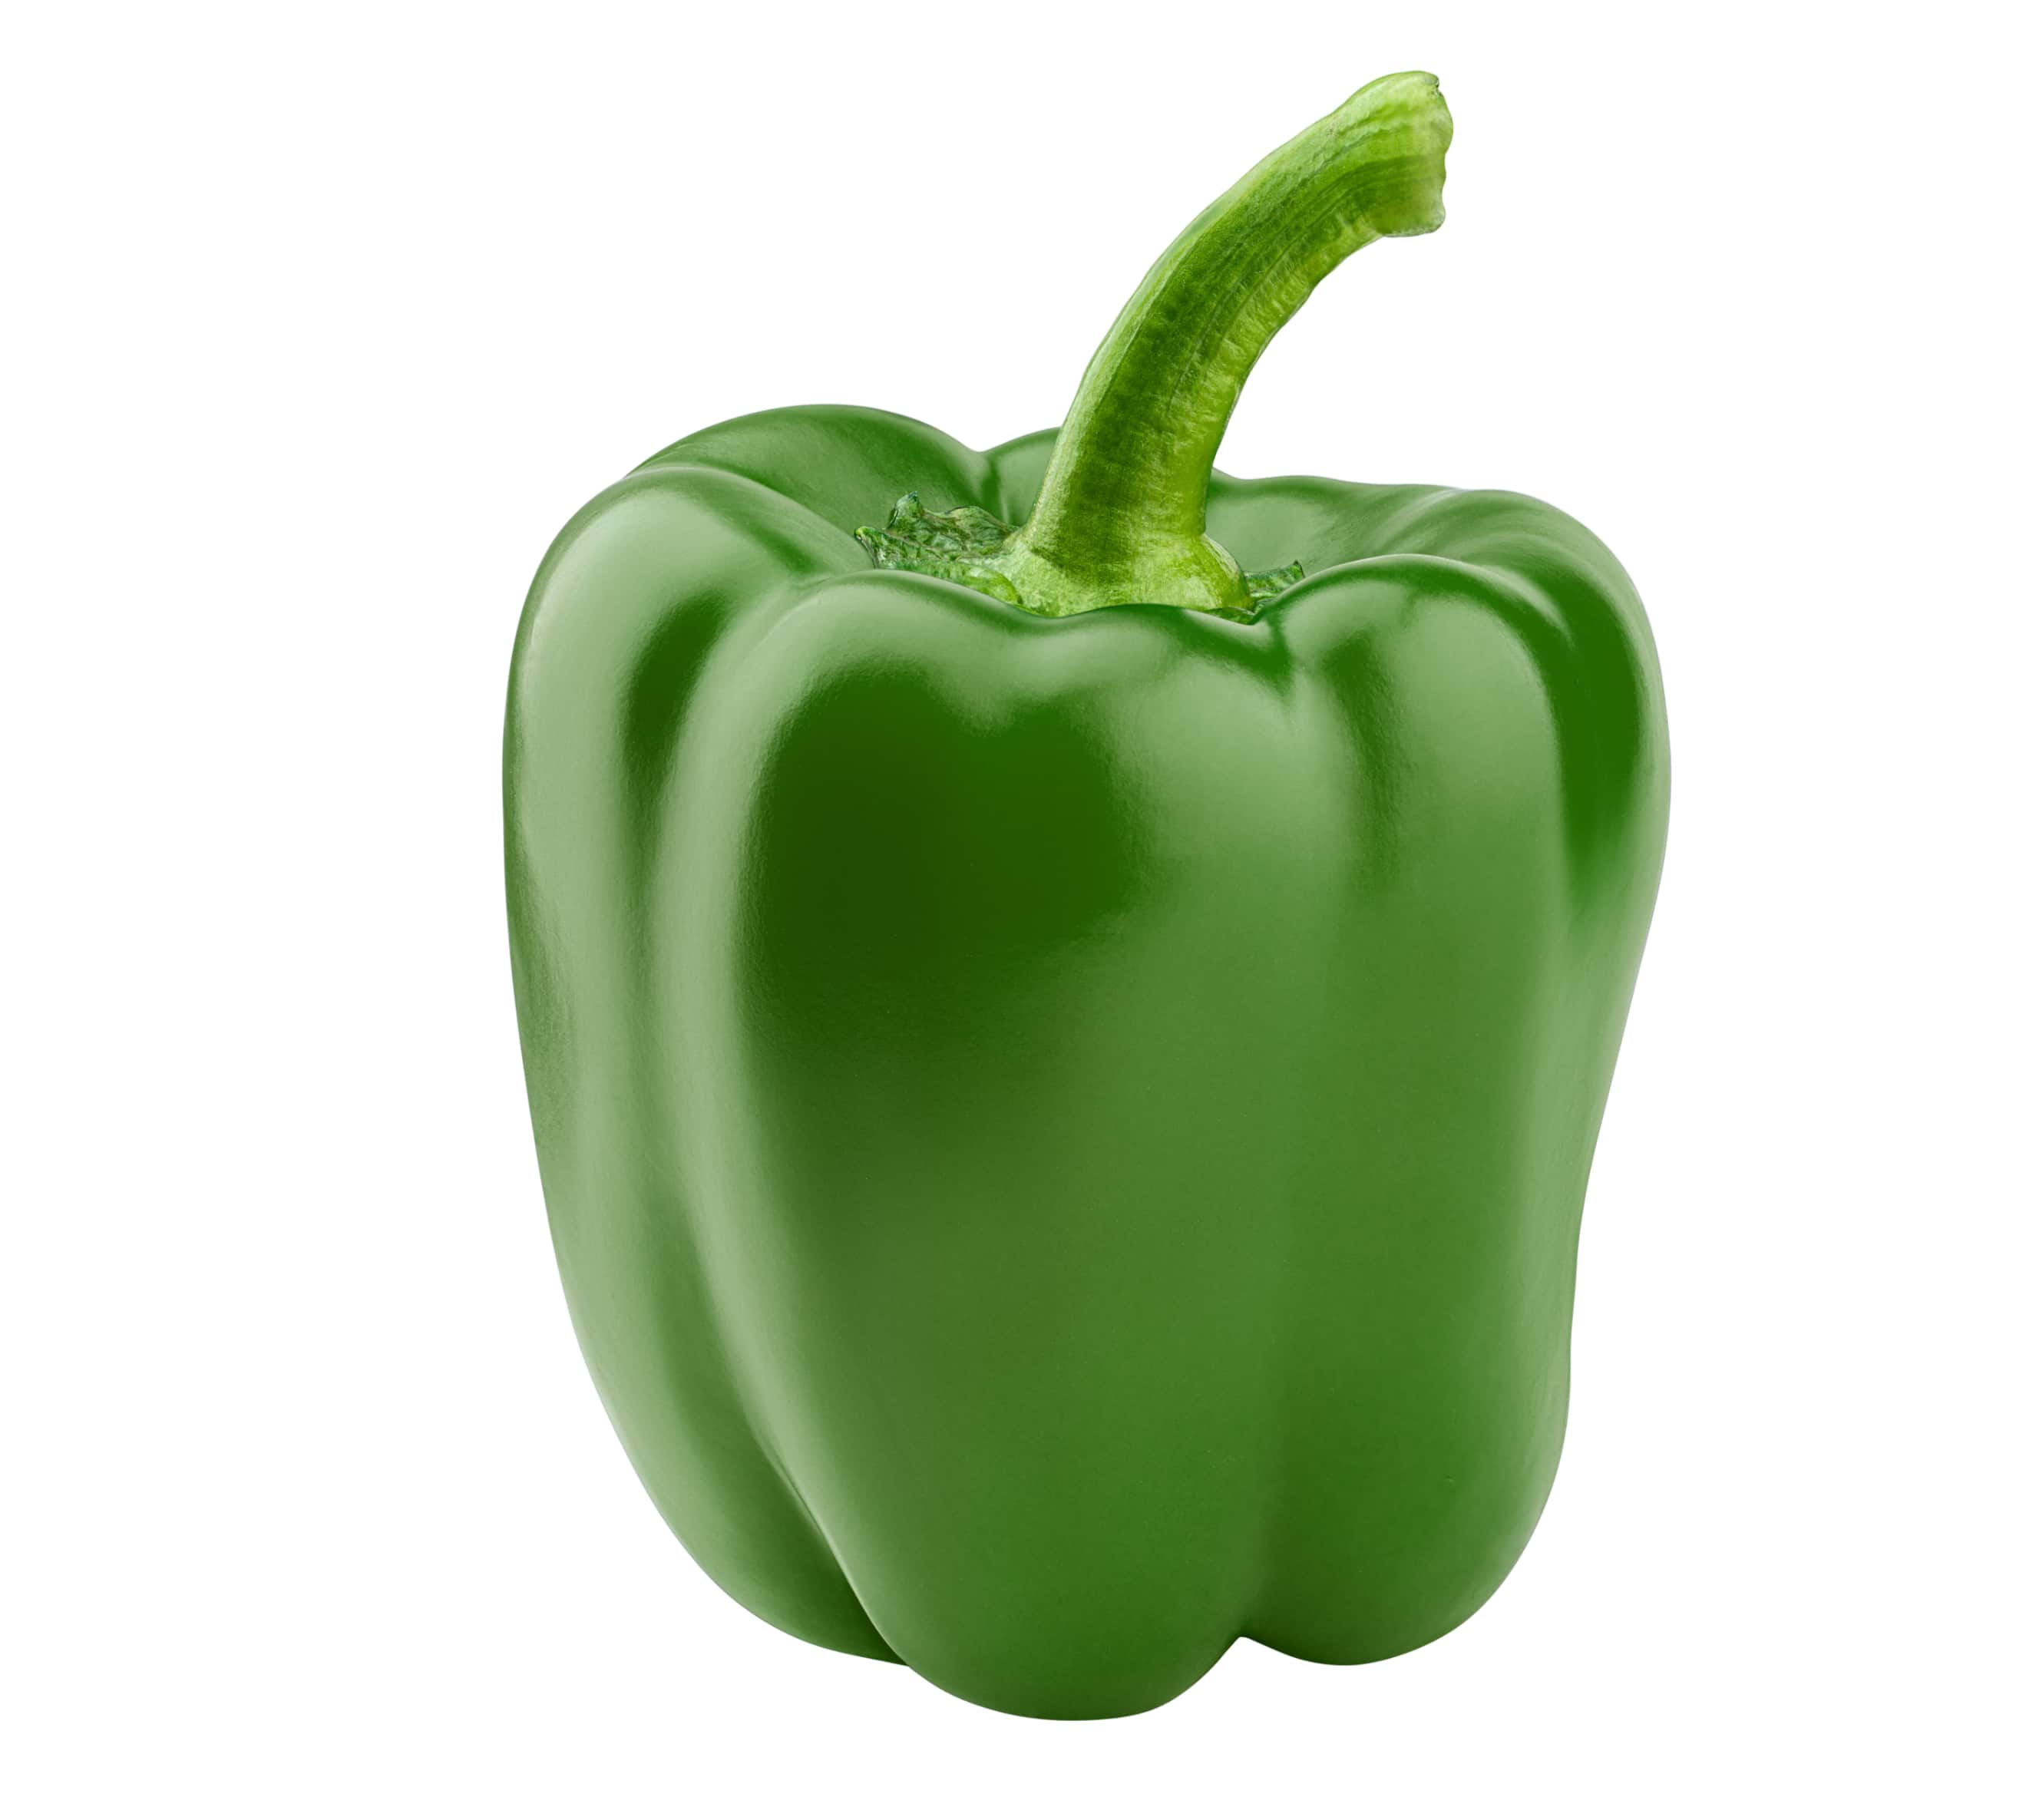 Maxibell Sweet Pepper variety from Royal Seed